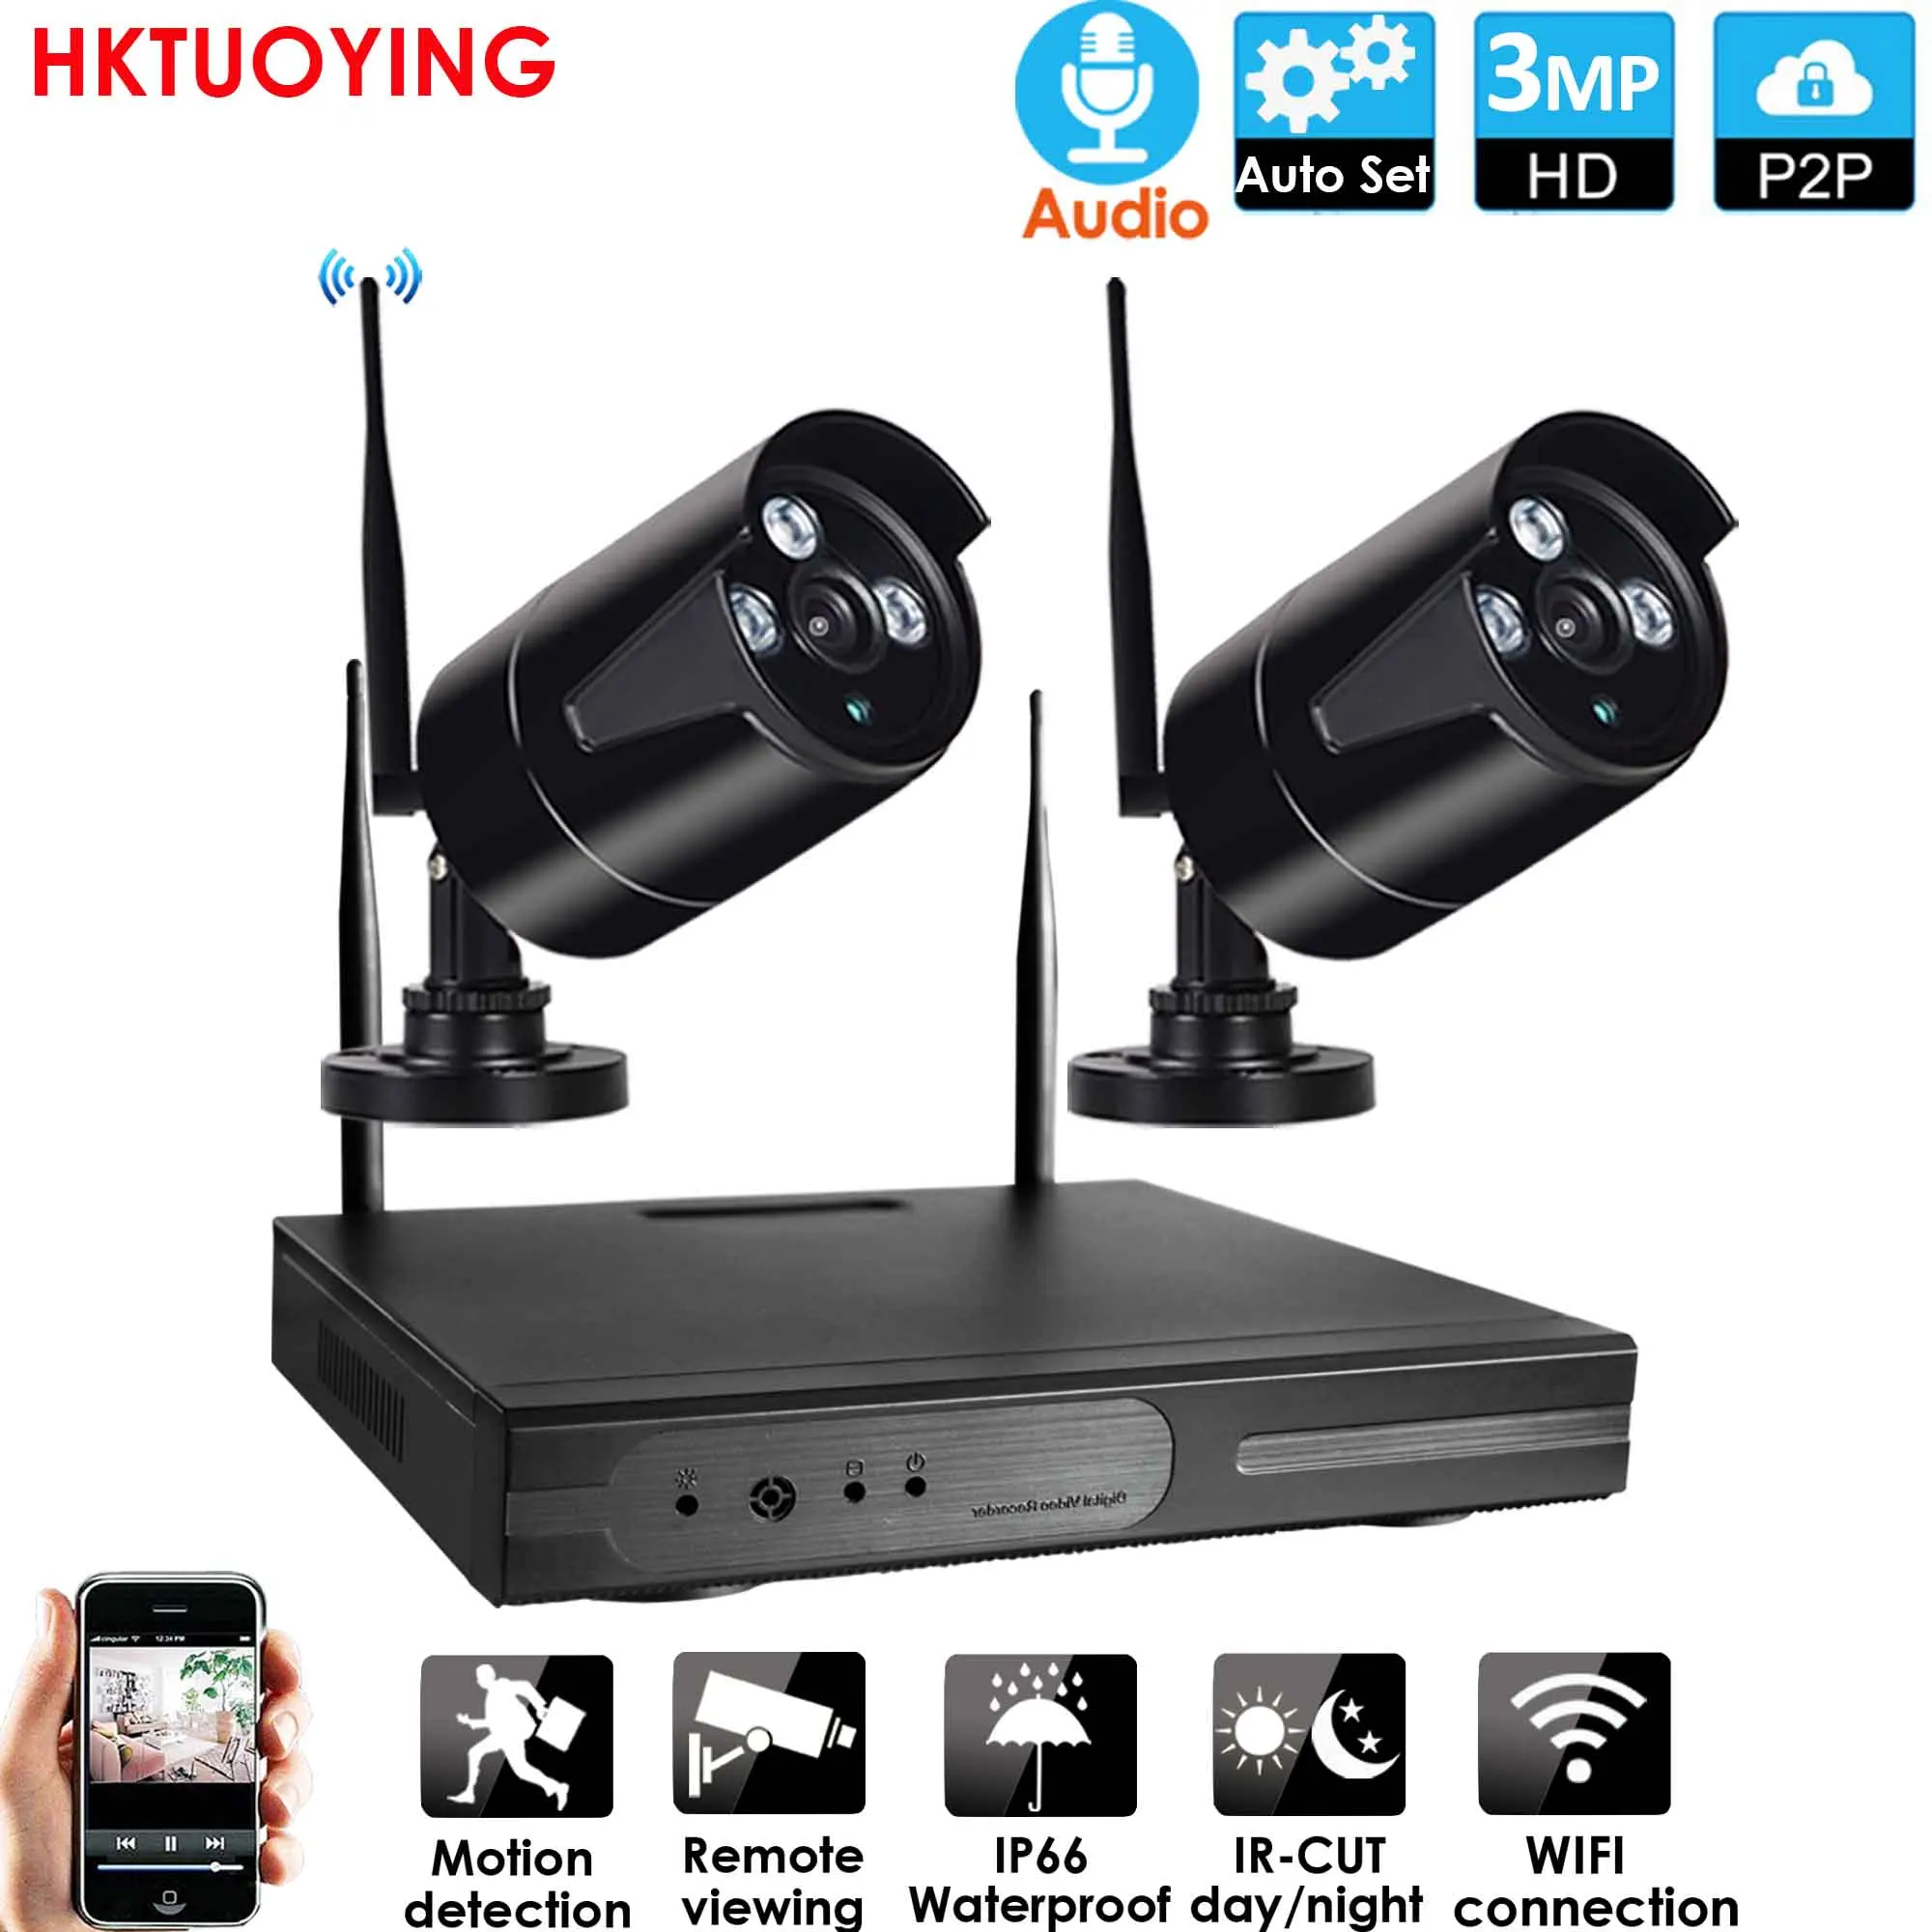 

2CH 3.0mP Audio HD Wireless NVR Kit P2P 3.0mP Indoor Outdoor IR Night Vision Security 3.0MP IP Audio Camera WIFI CCTV System